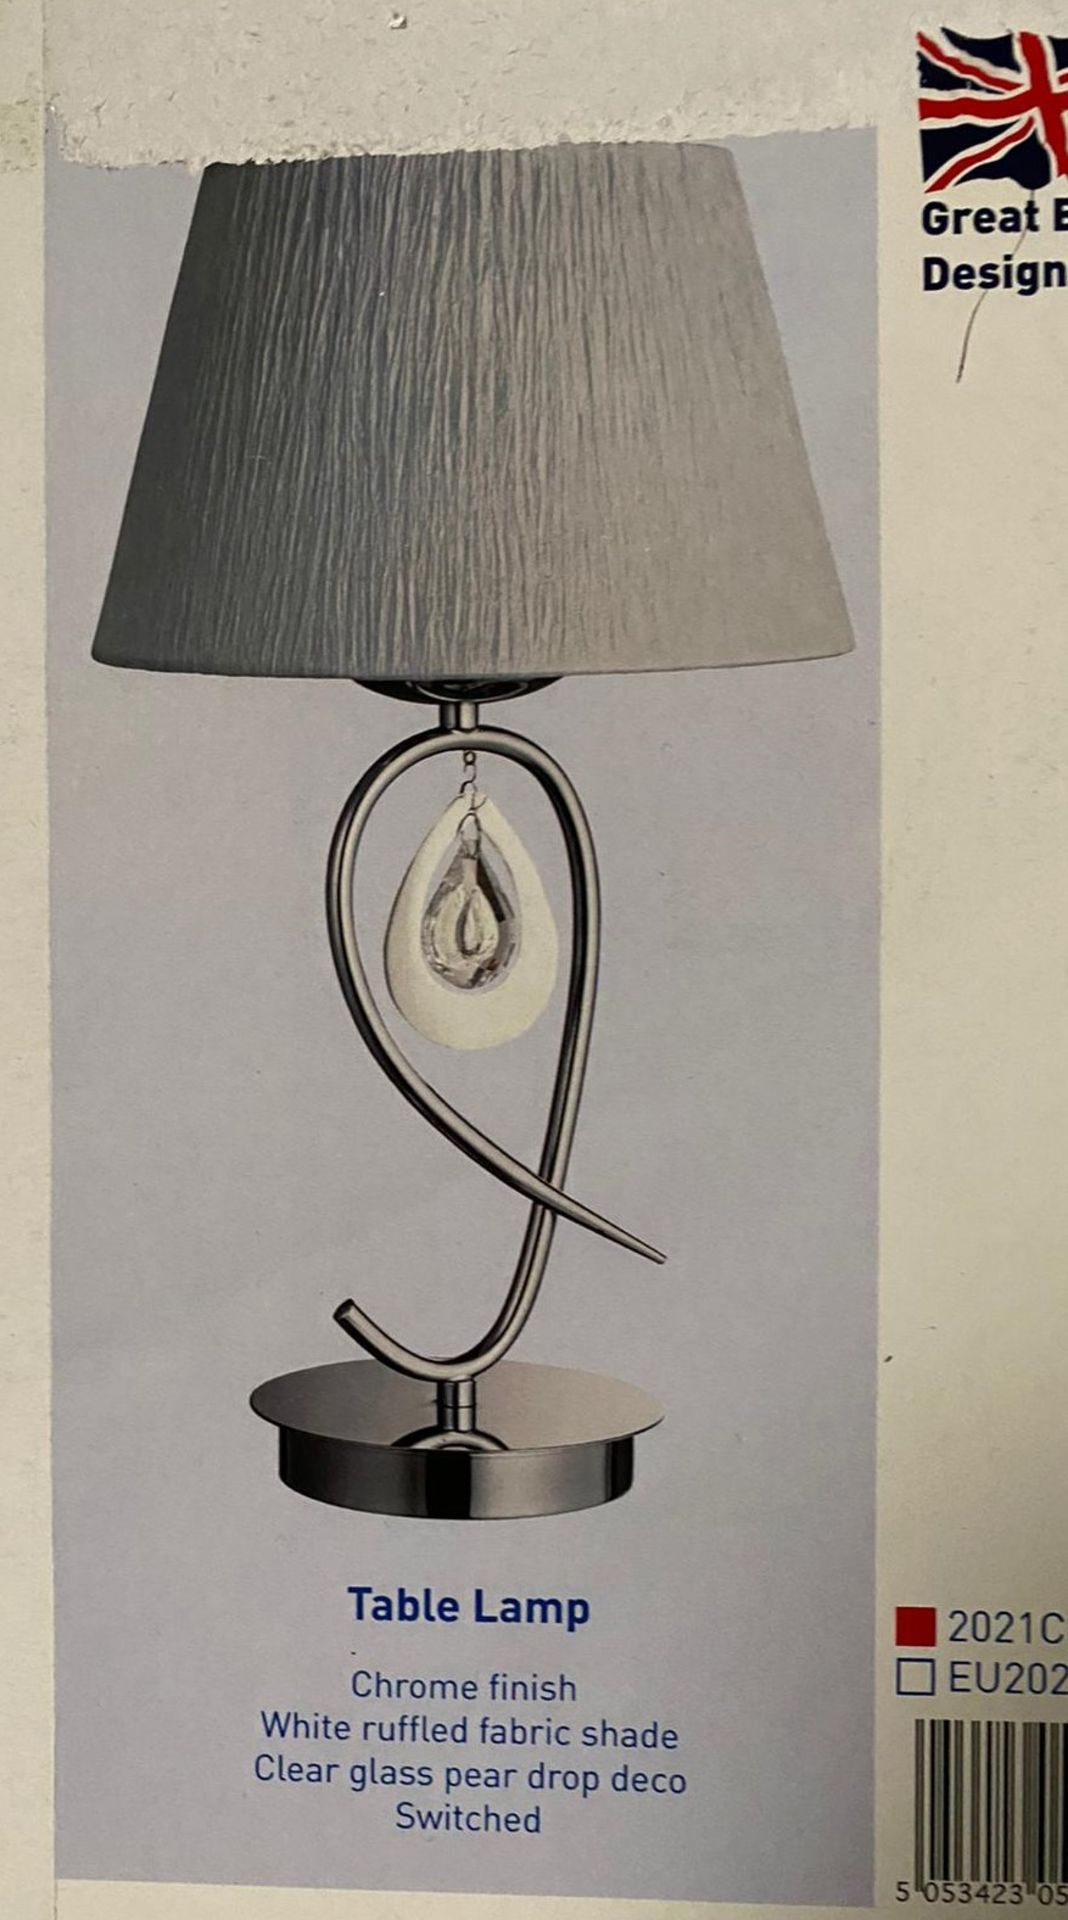 1 x Searchlight Table Lamp in chrome - Ref: 2021CC - New and Boxed - RRP £80 - Image 2 of 4